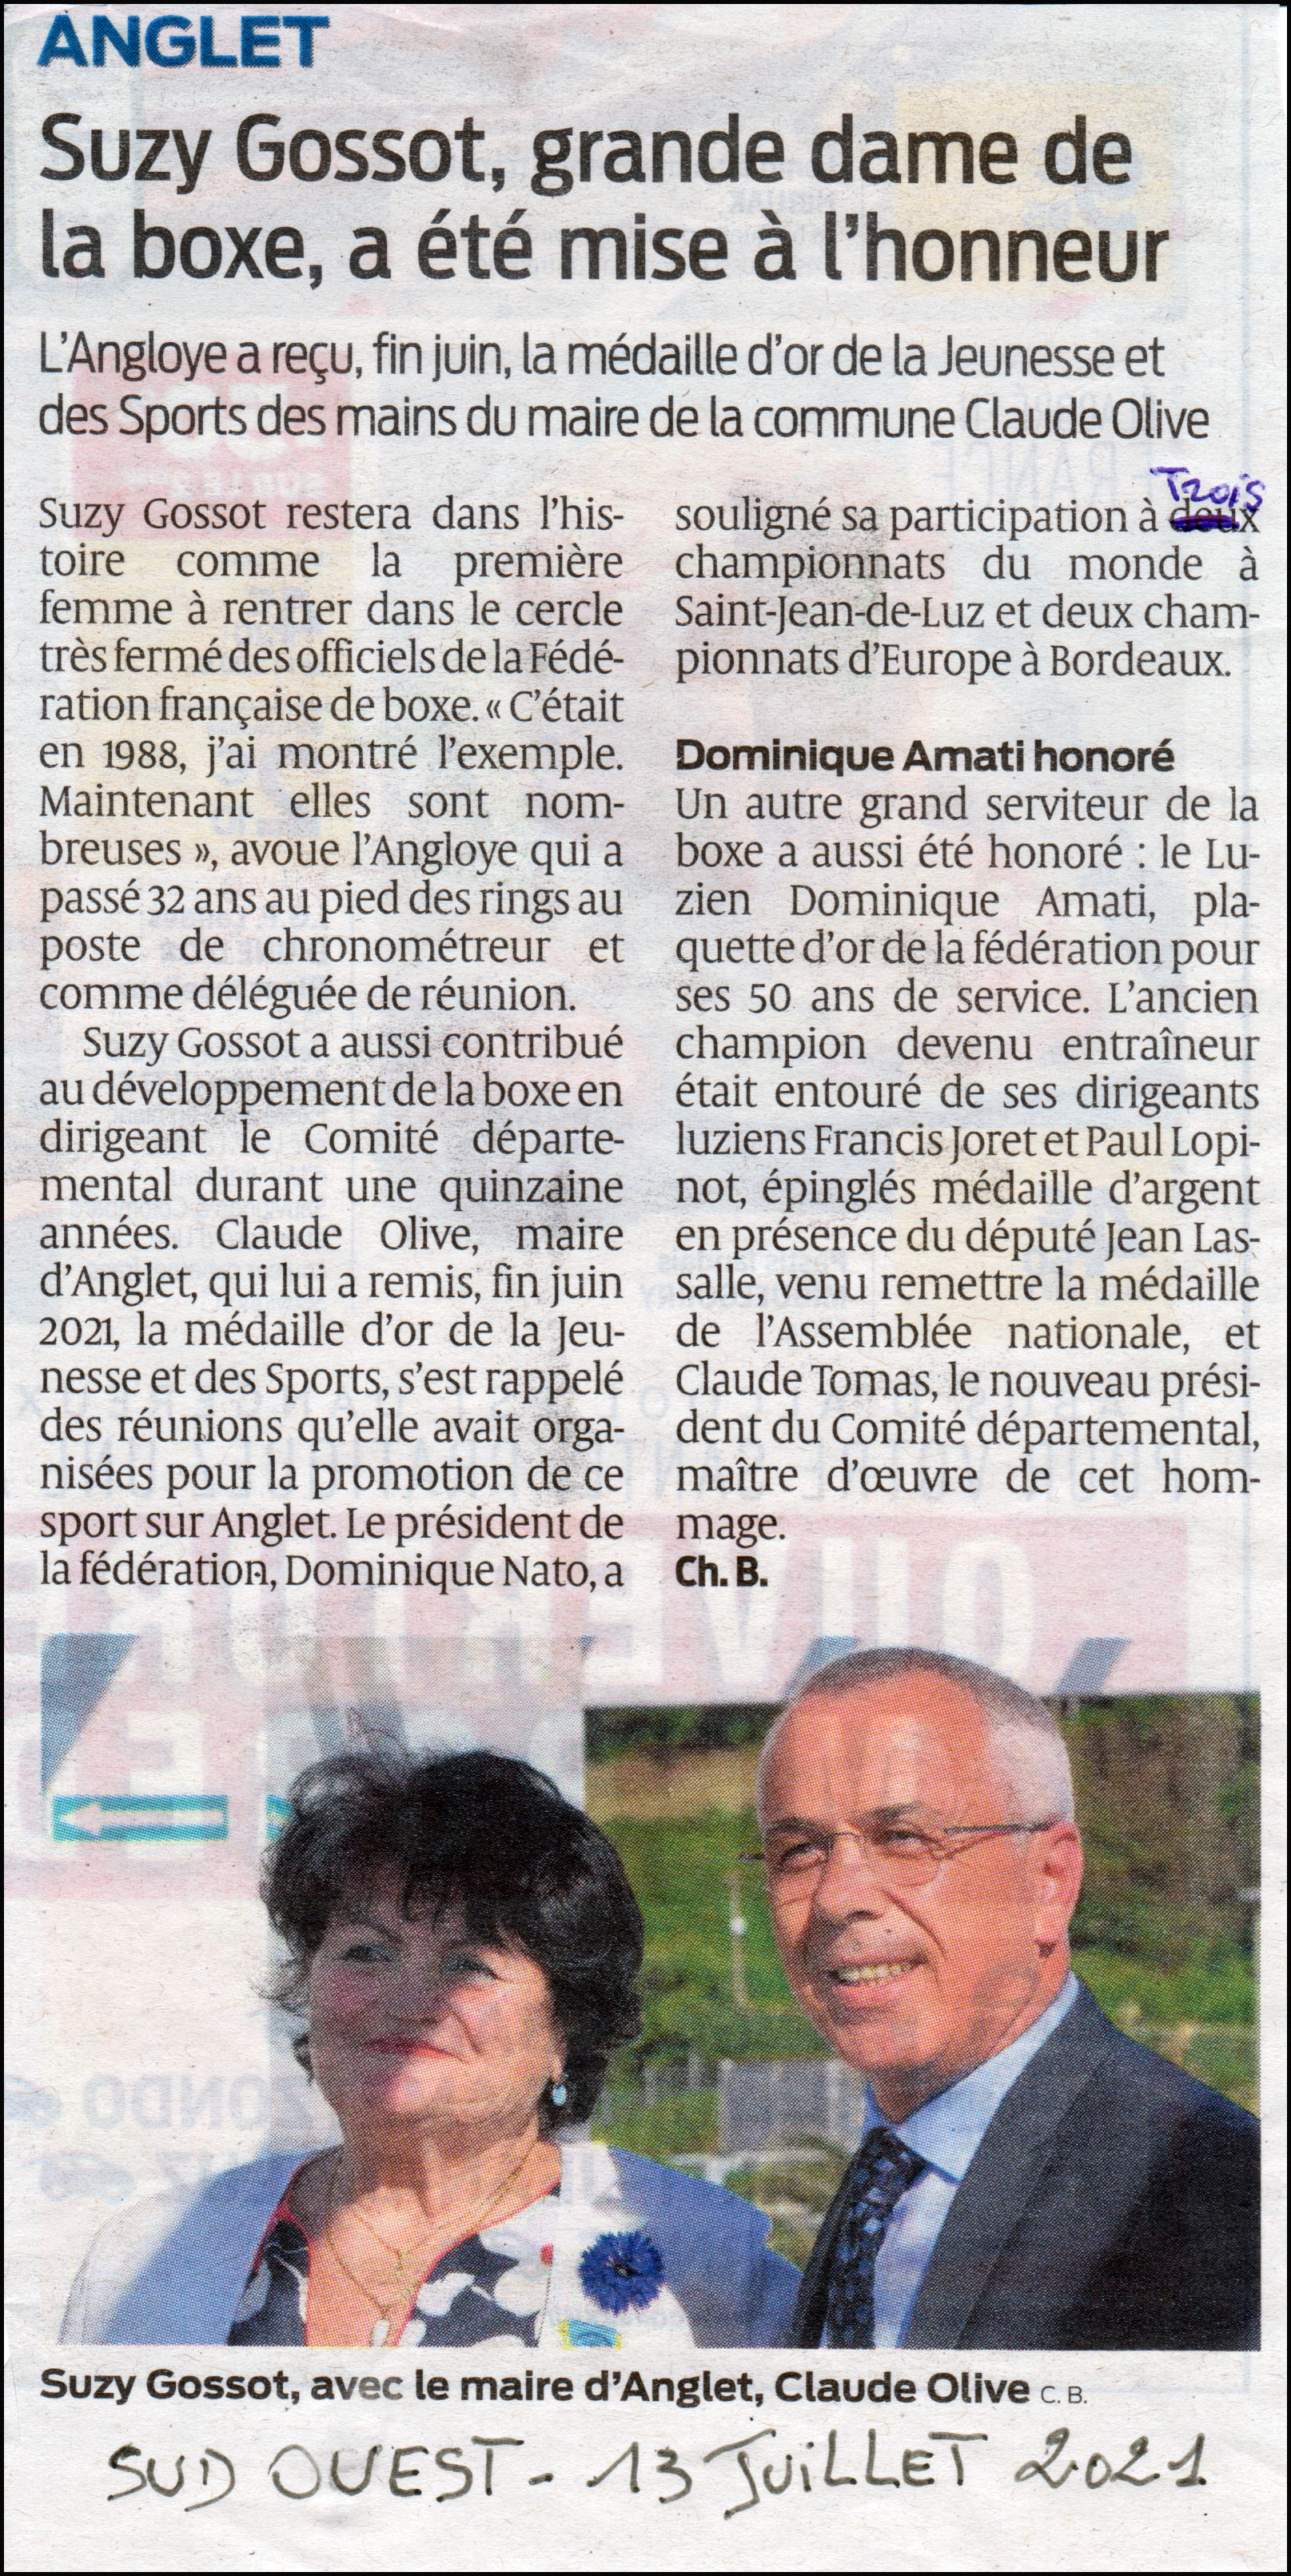 02 - Sud Ouest